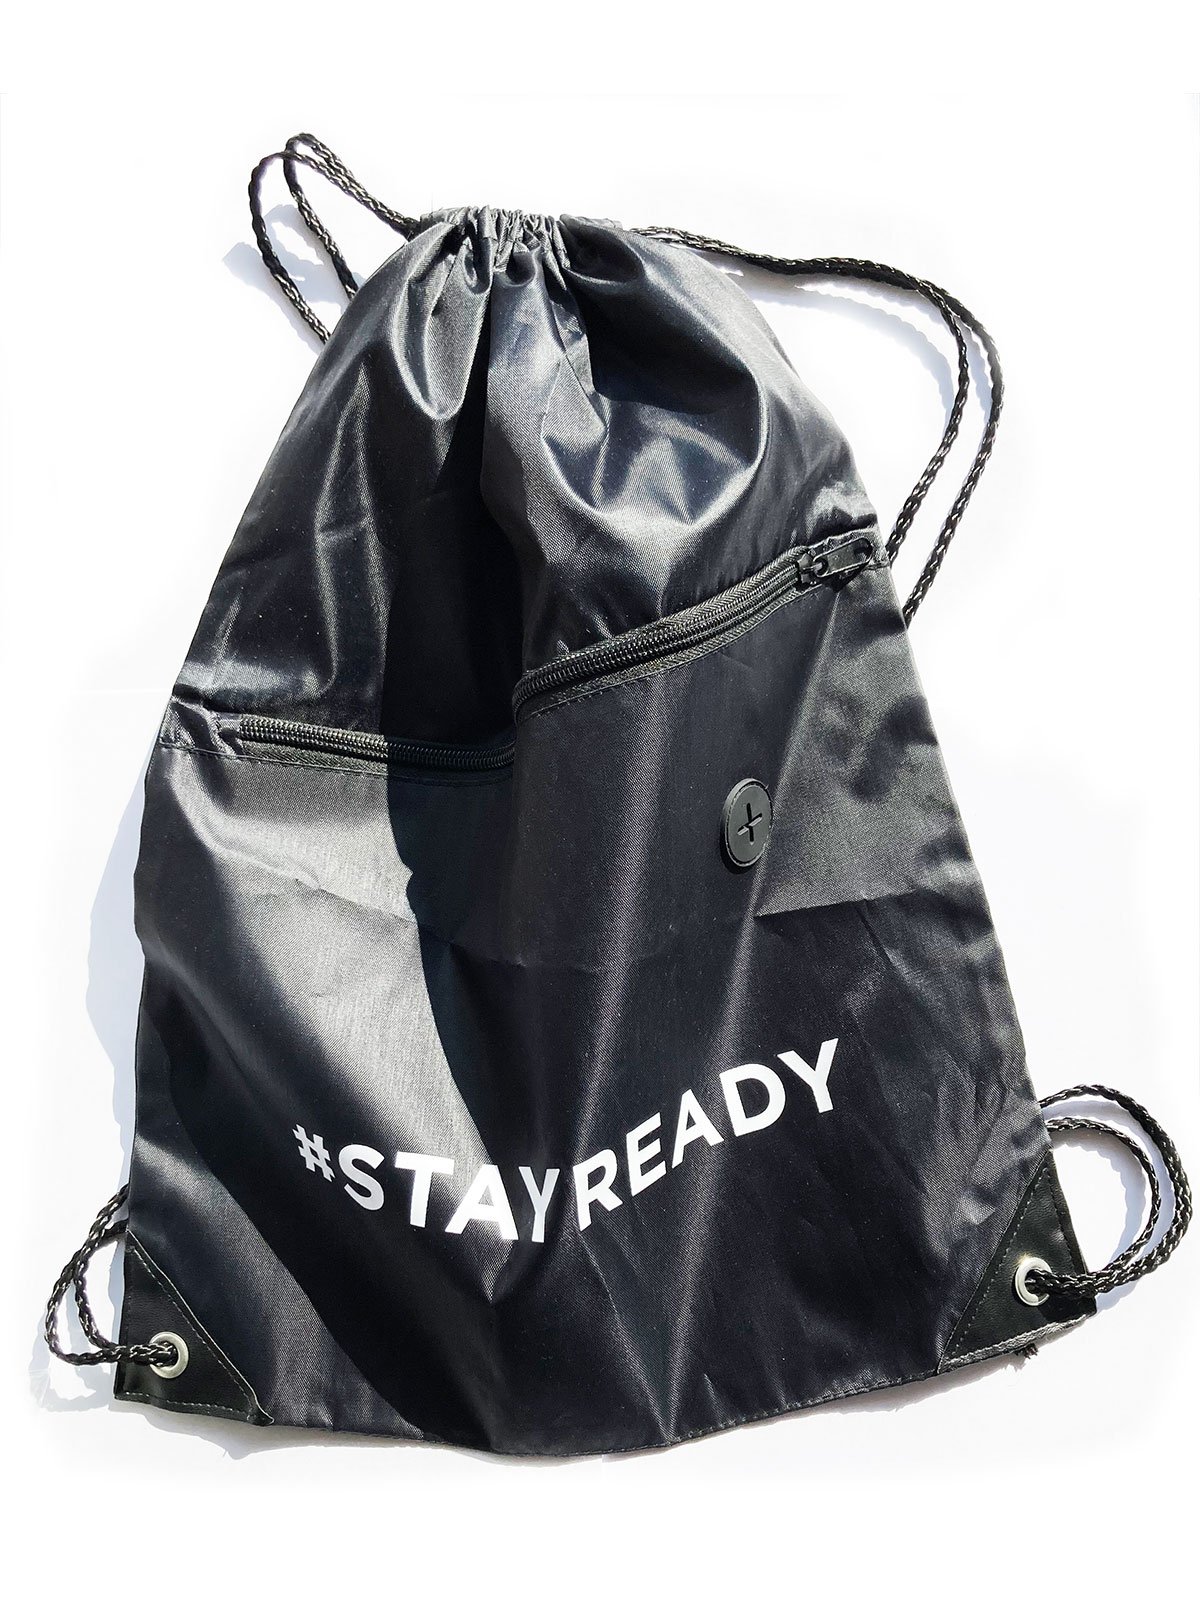 Backpack #Stay Ready | Black